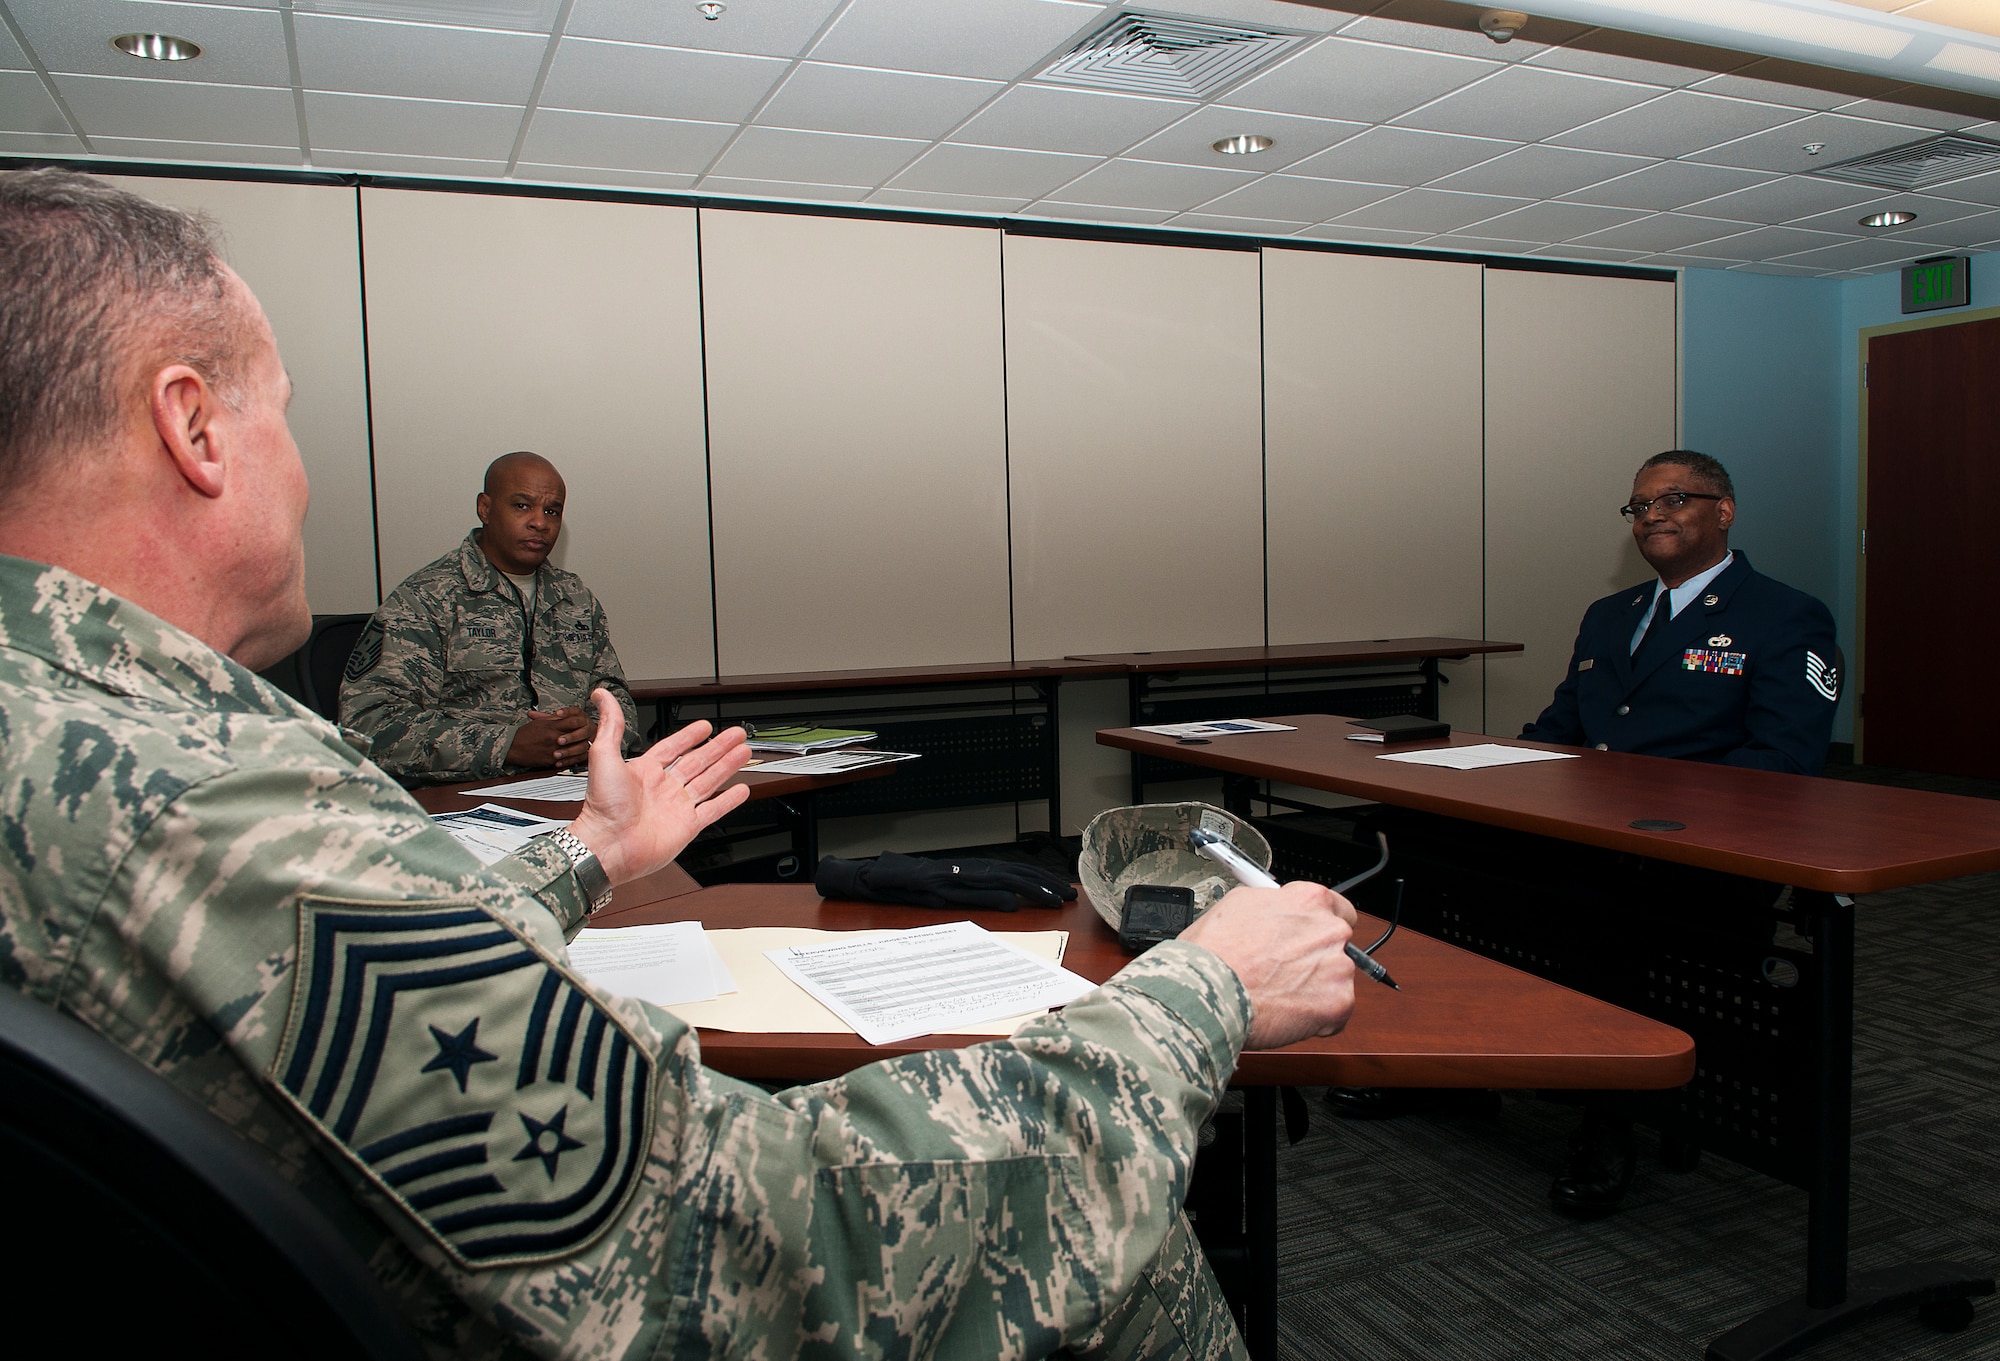 Command Chief Master Sgt. Eric Wallace, 121st Air Refueling Wing, interviews Master Sgt. Earl Walker, 121st Logistic Readiness at Rickenbacker Air National Guard Base, Ohio, Feb. 7, 2015. Members of the 121st Air Refueling Wing participated in a mock board interviews during the February UTA. (U.S. Air National Guard photo by Tech. Sgt, Zachary Wintgens/Released)